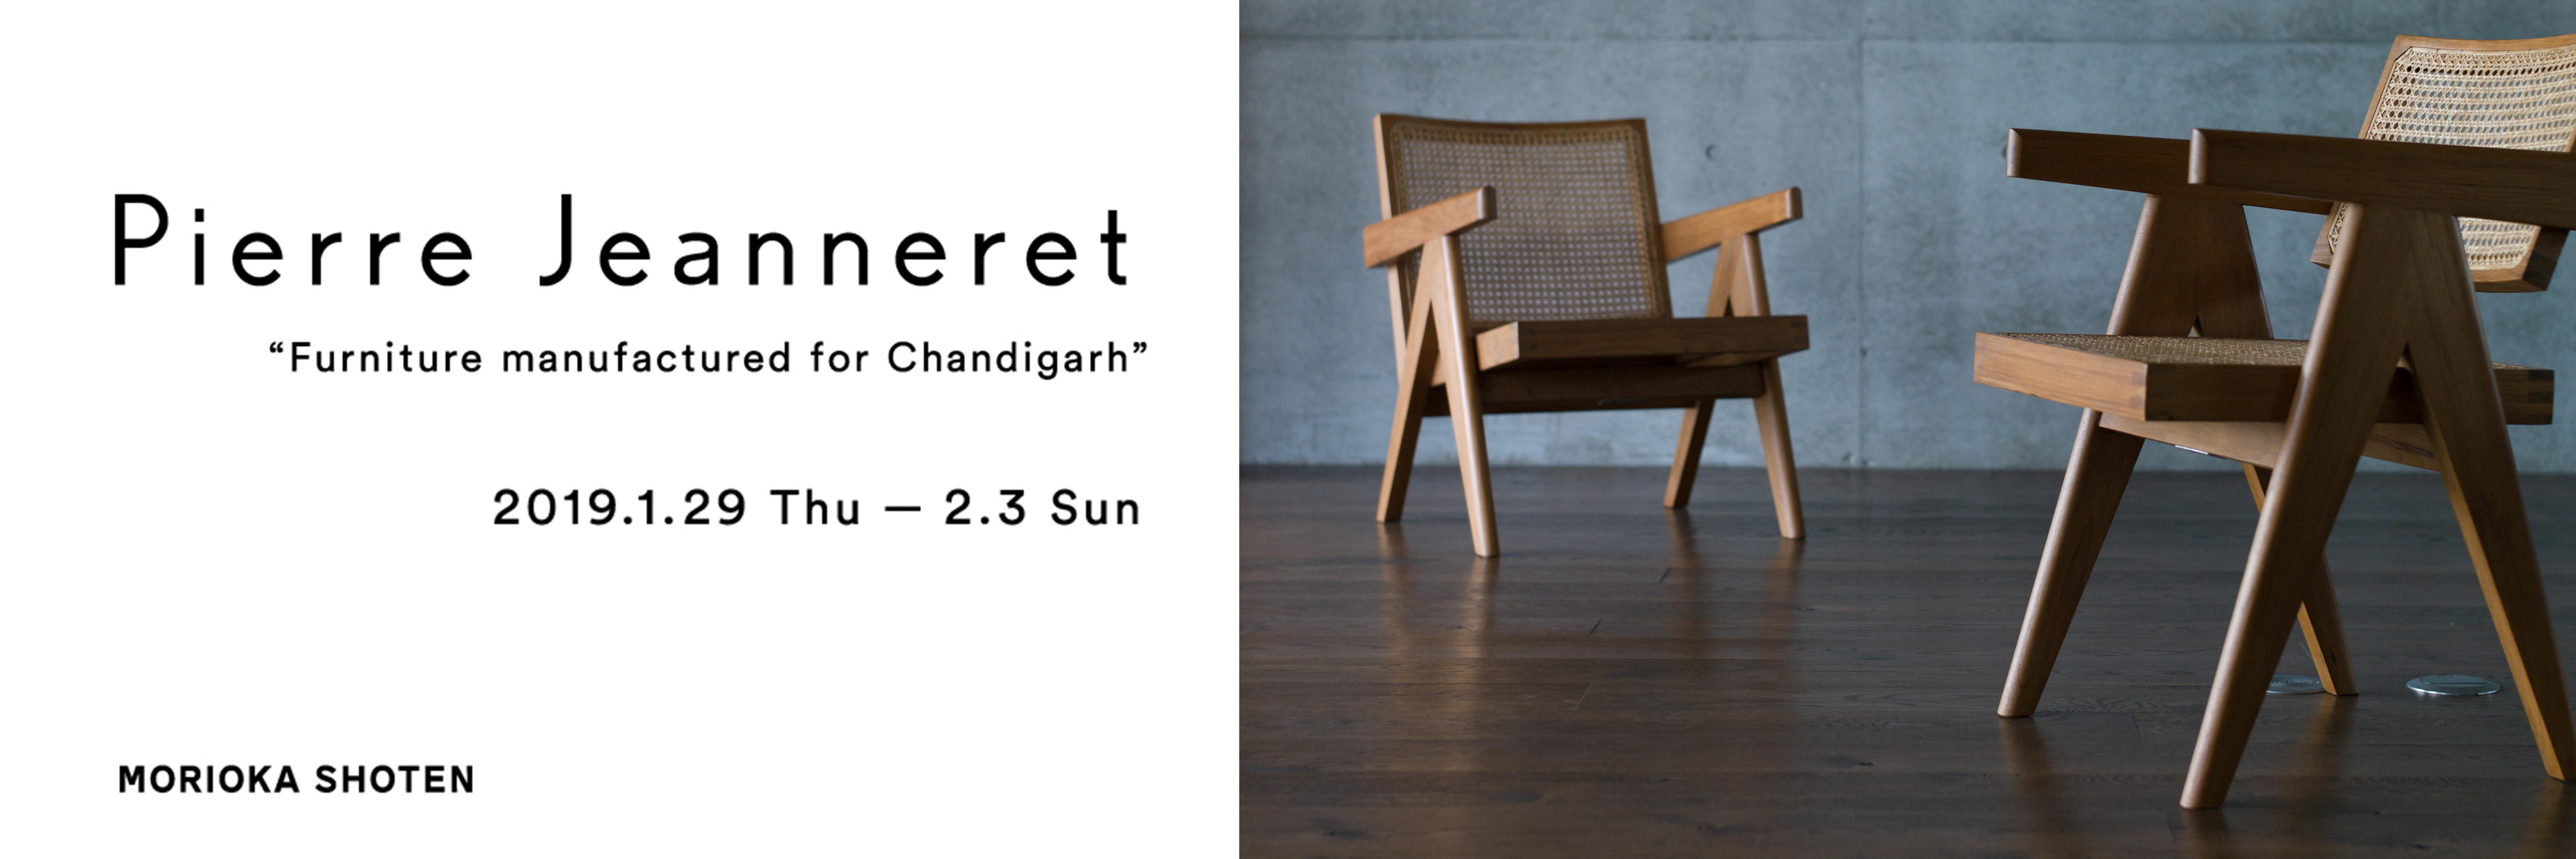 Exhibition | Project Chandigarh